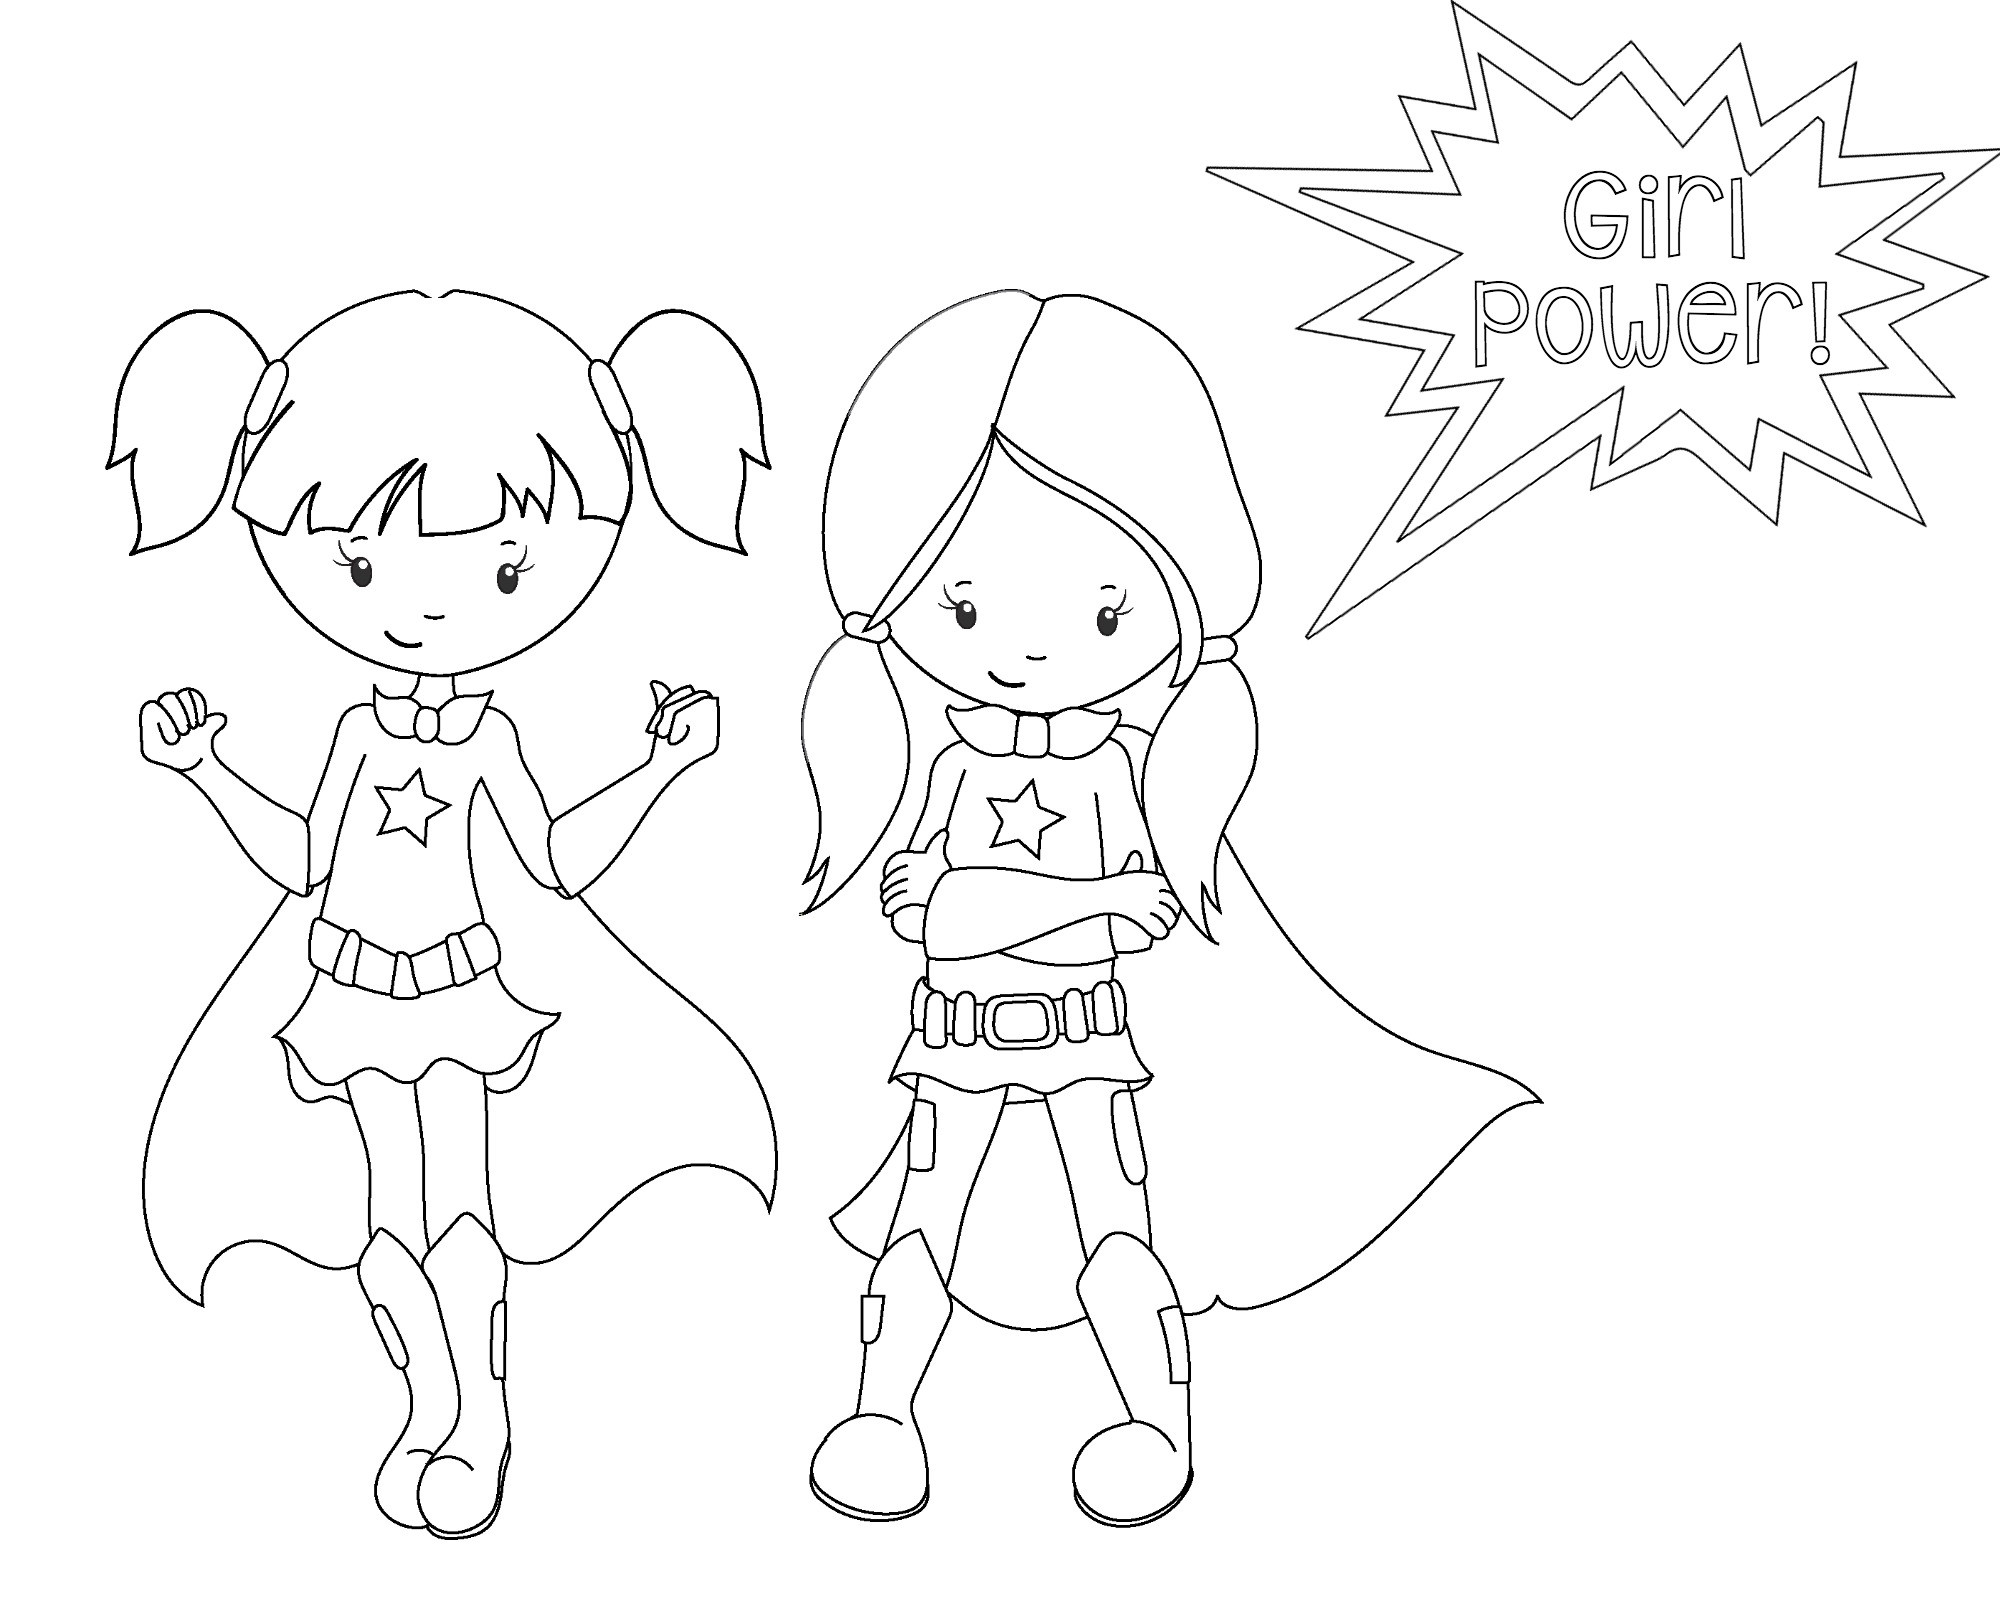 Superhero Coloring Pages To Print
 Superhero Coloring Pages Crazy Little Projects